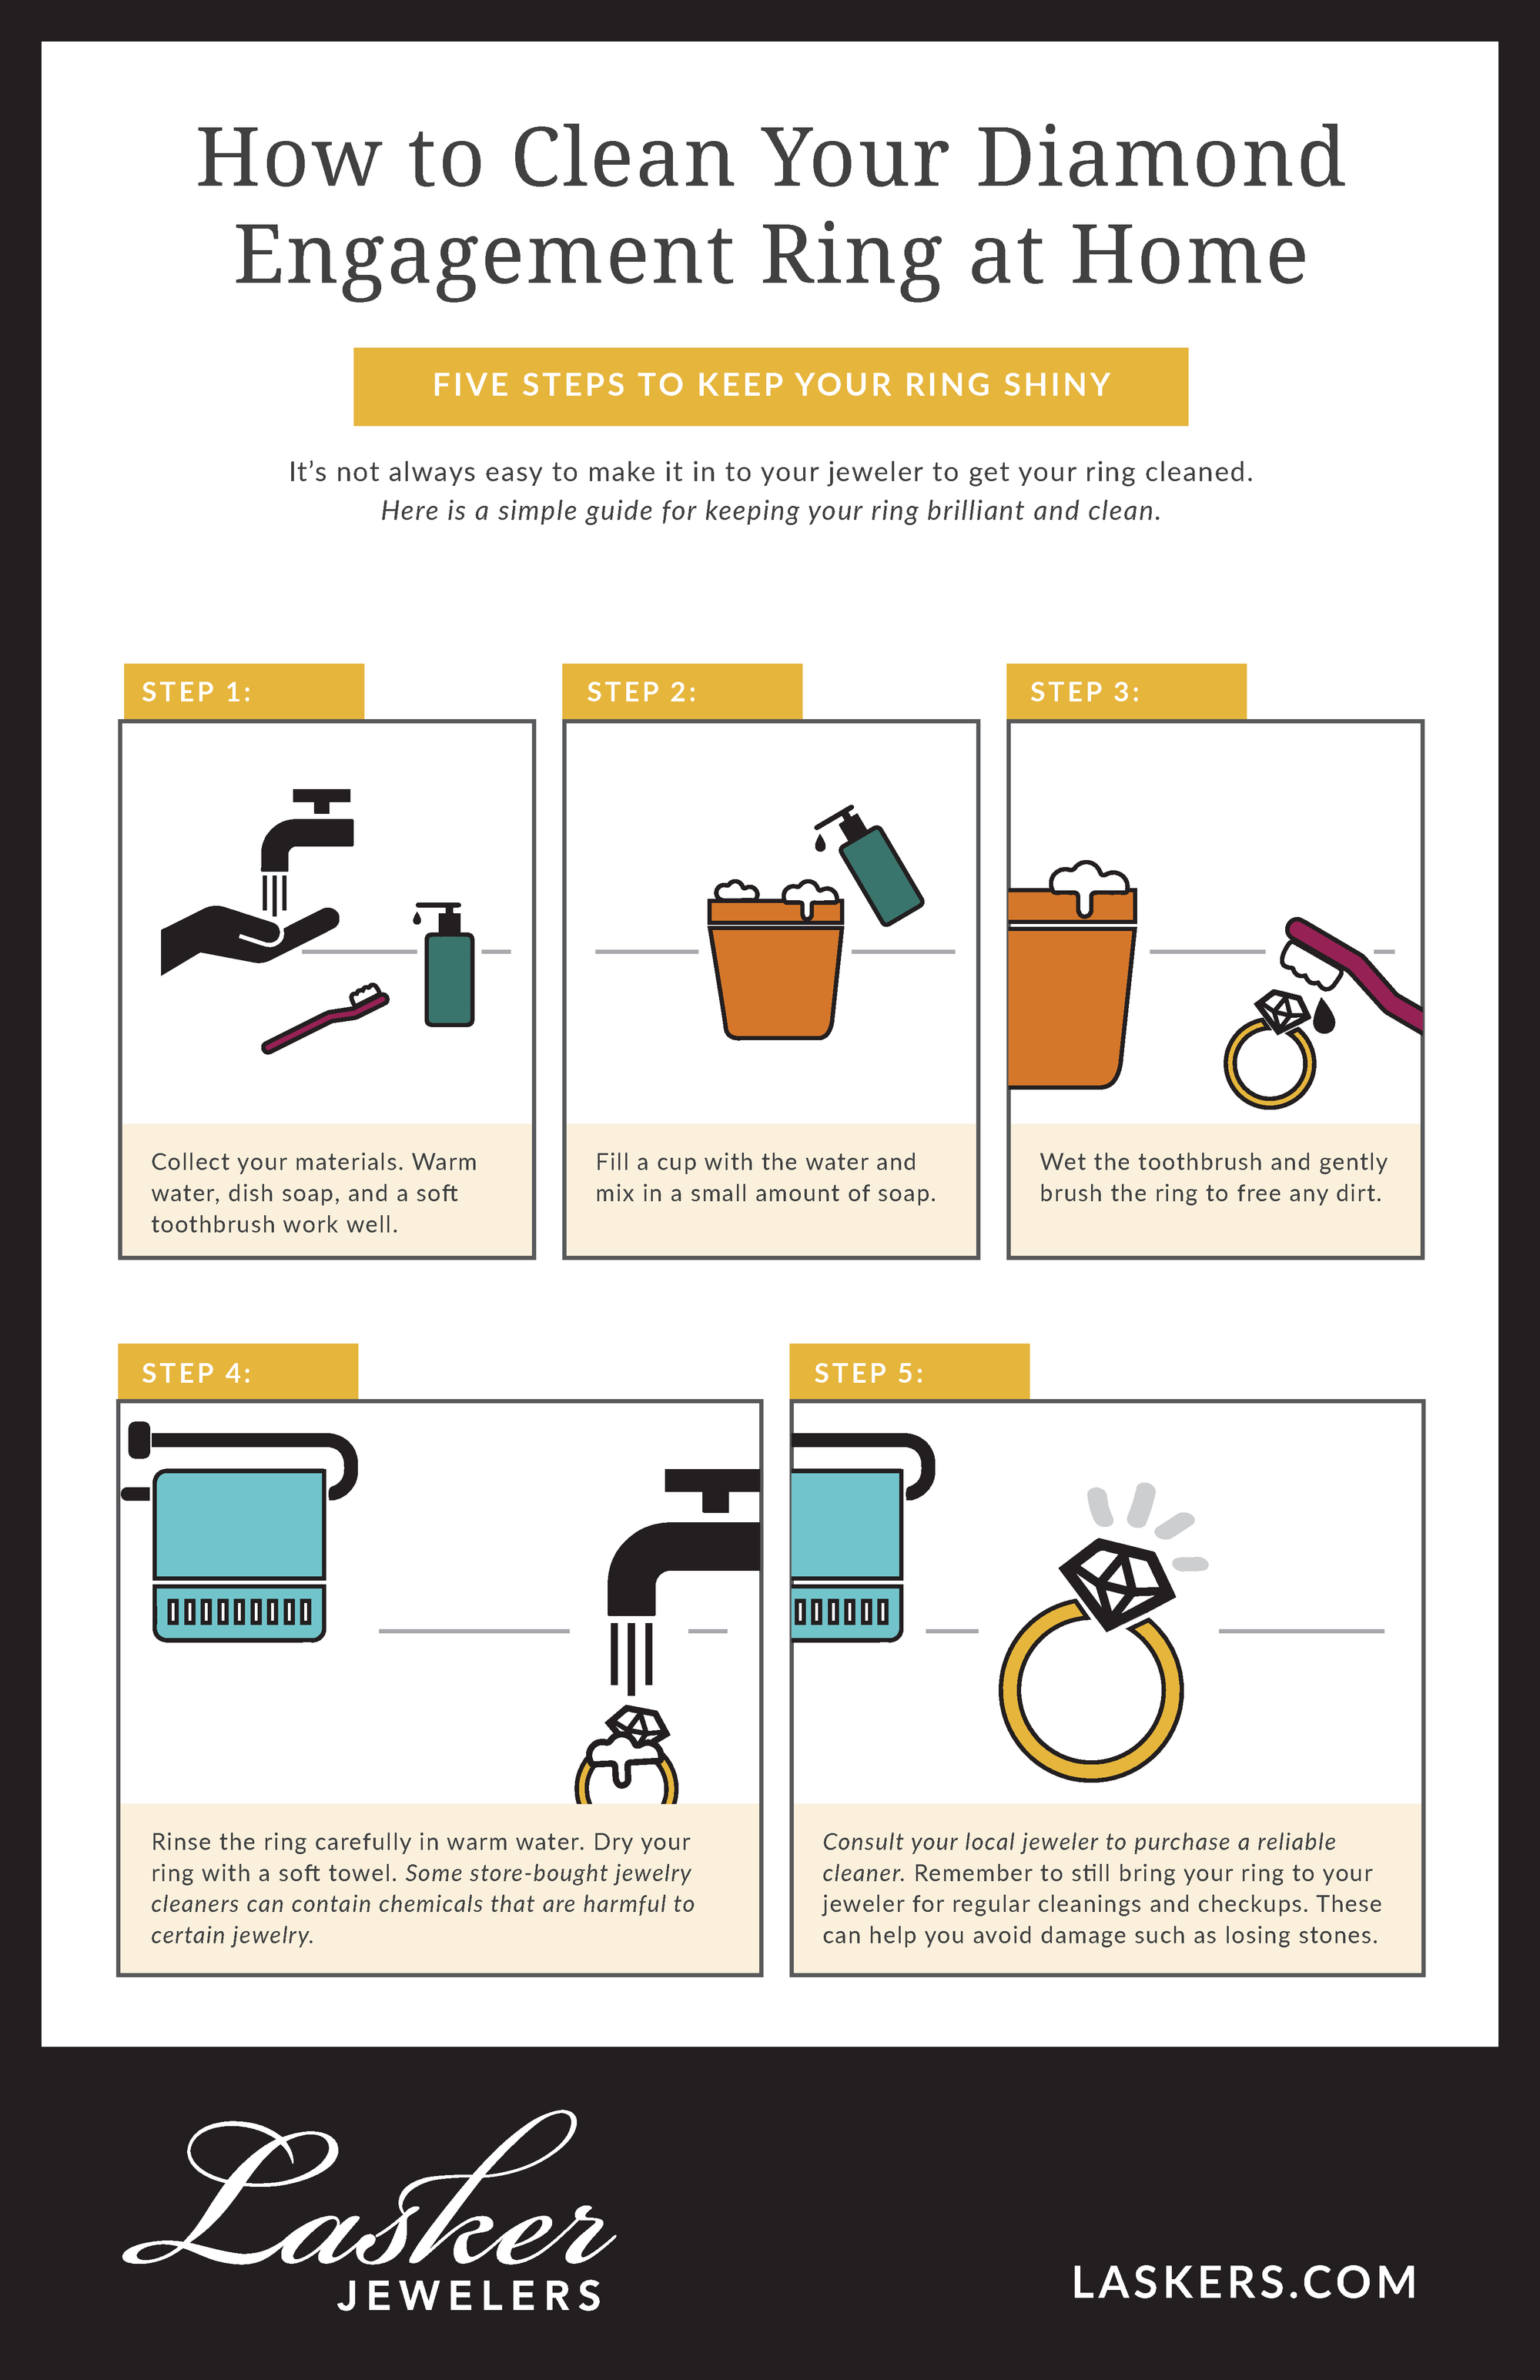 How to Clean Your Diamond Engagement Ring at Home - Lasker Jewelers